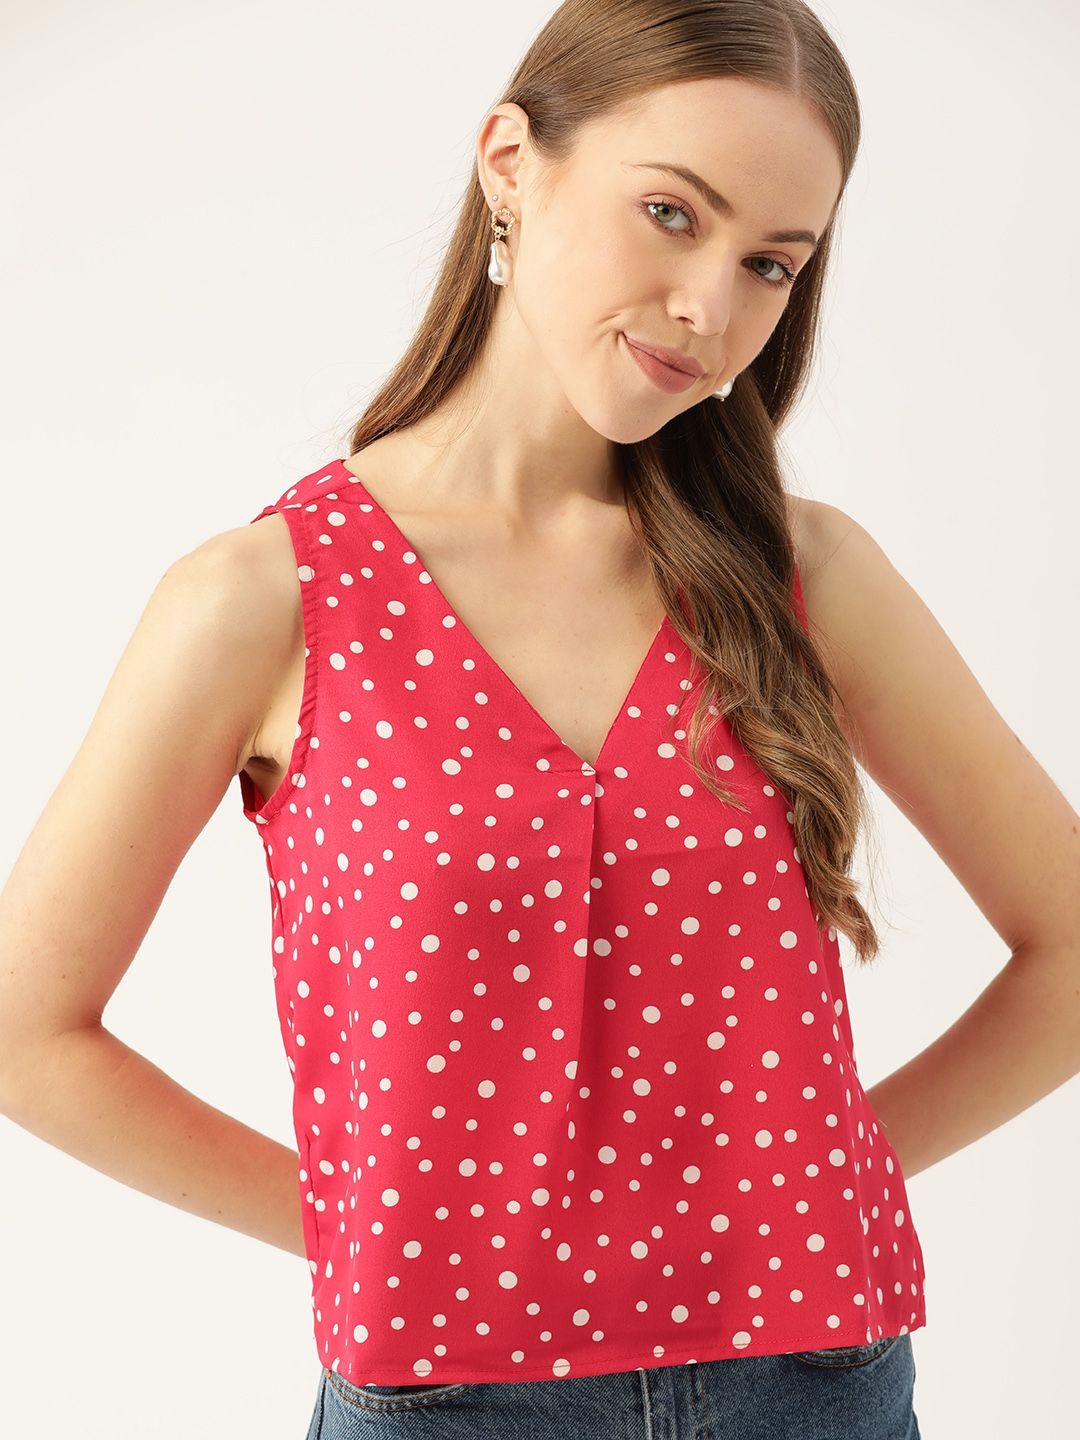 dressberry women red & white polka dots printed top